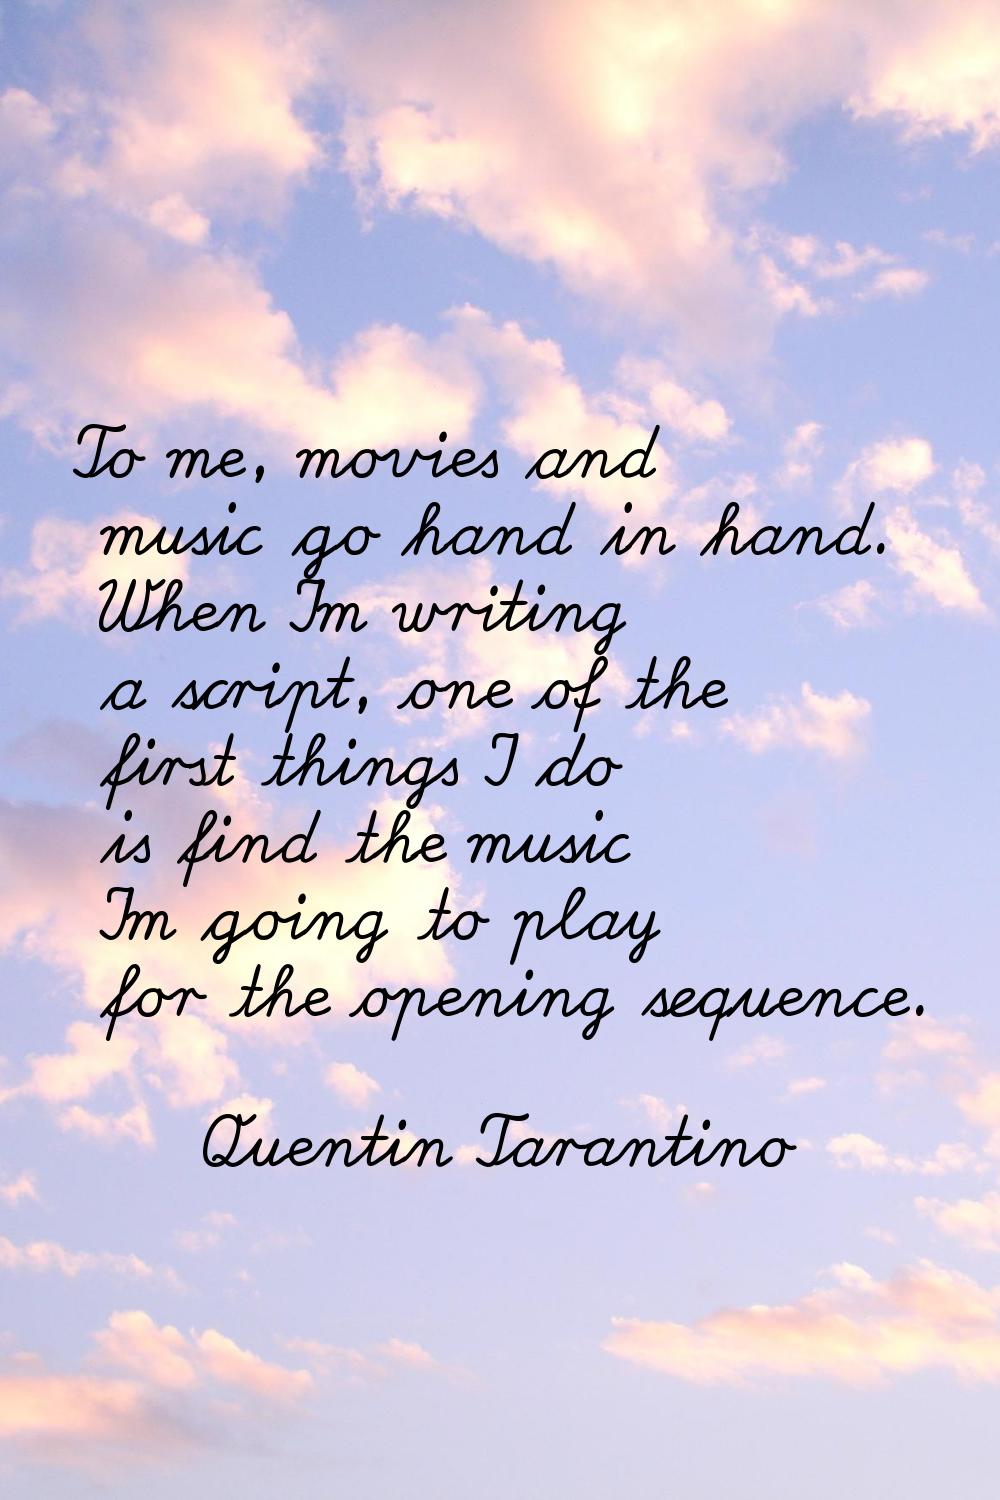 To me, movies and music go hand in hand. When I'm writing a script, one of the first things I do is